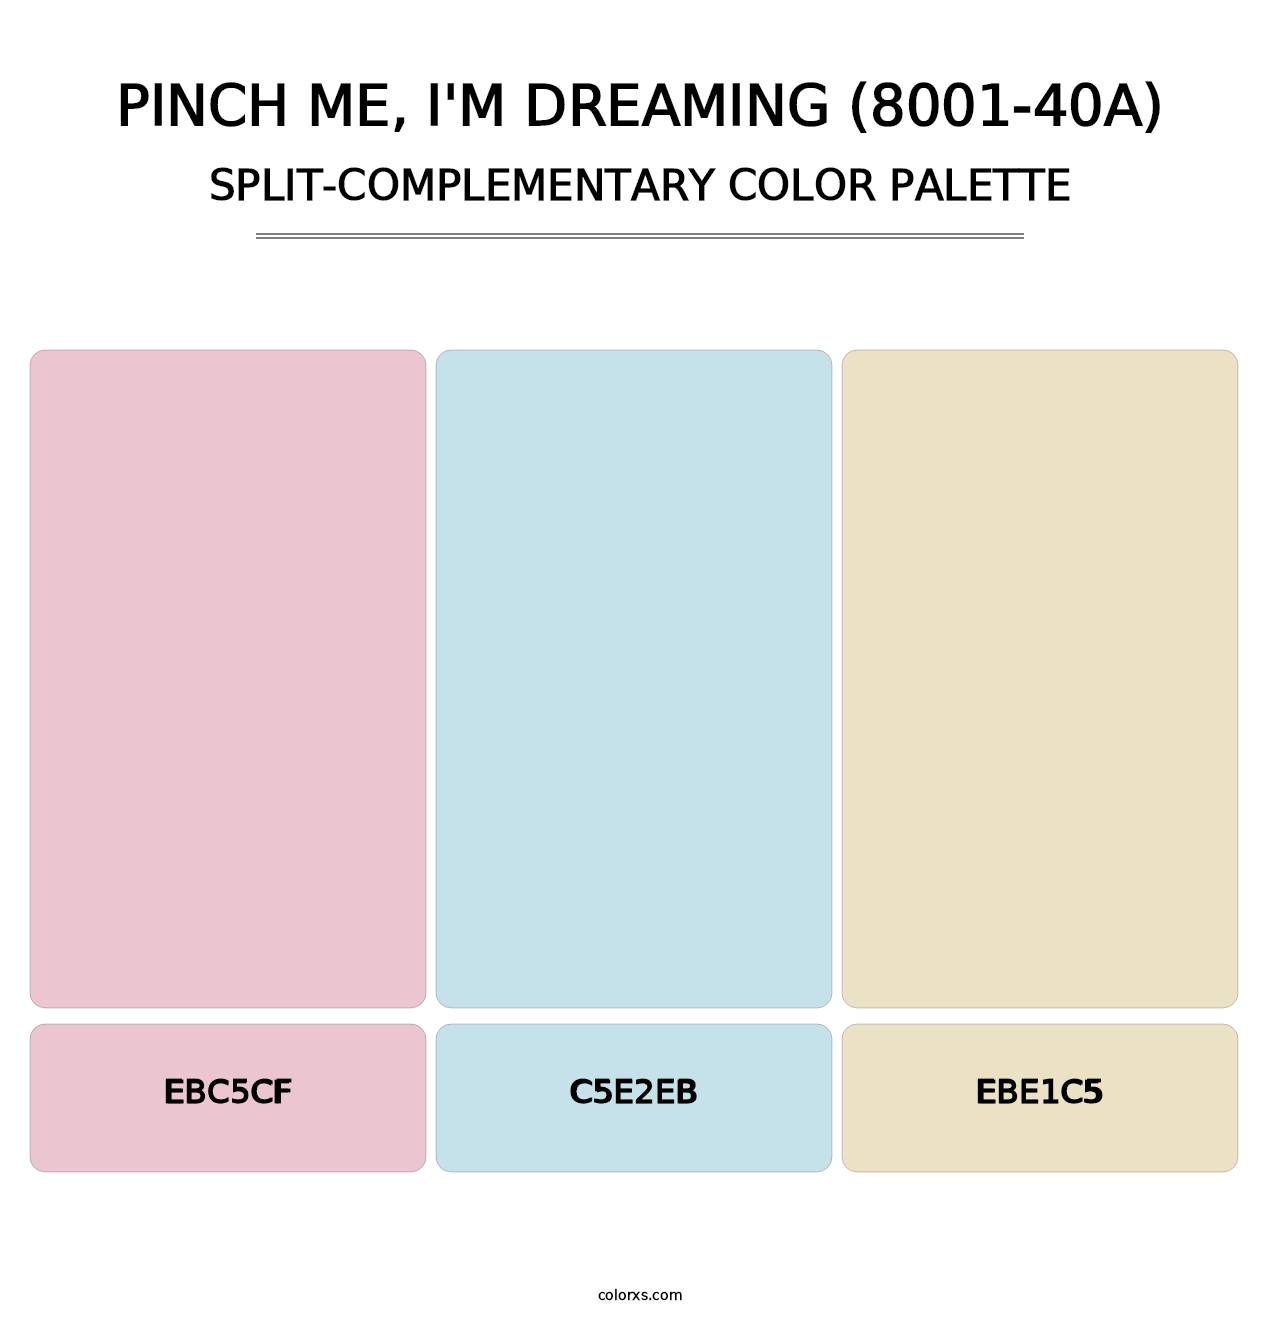 Pinch Me, I'm Dreaming (8001-40A) - Split-Complementary Color Palette